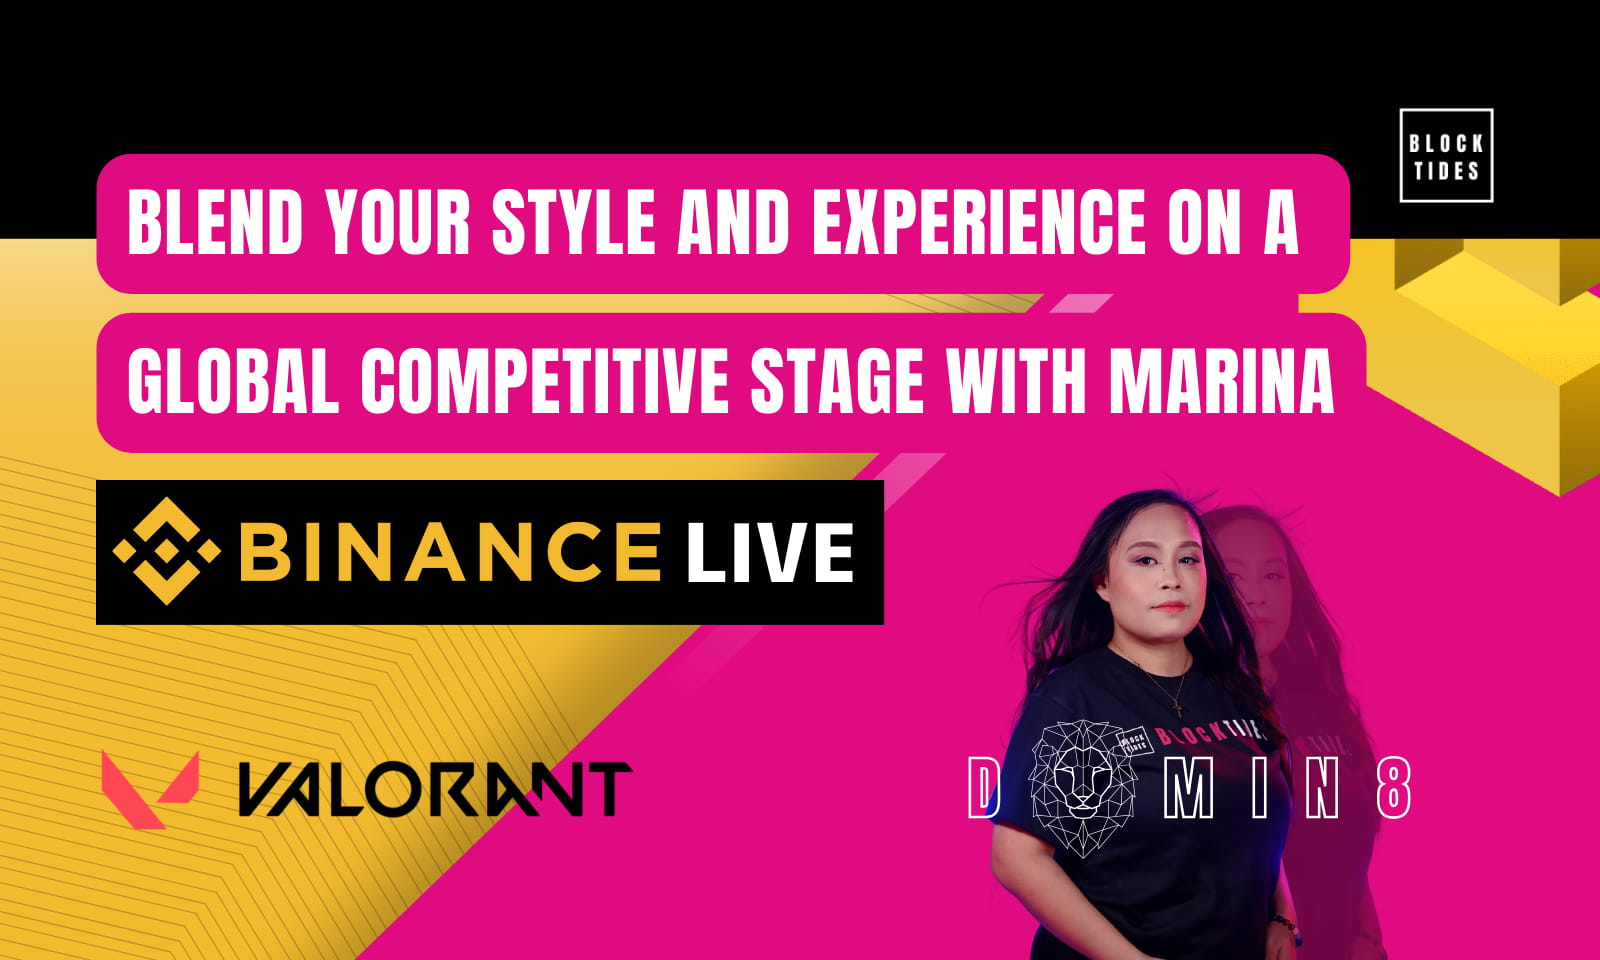 Blend your style on a global competitive stage with Valorant